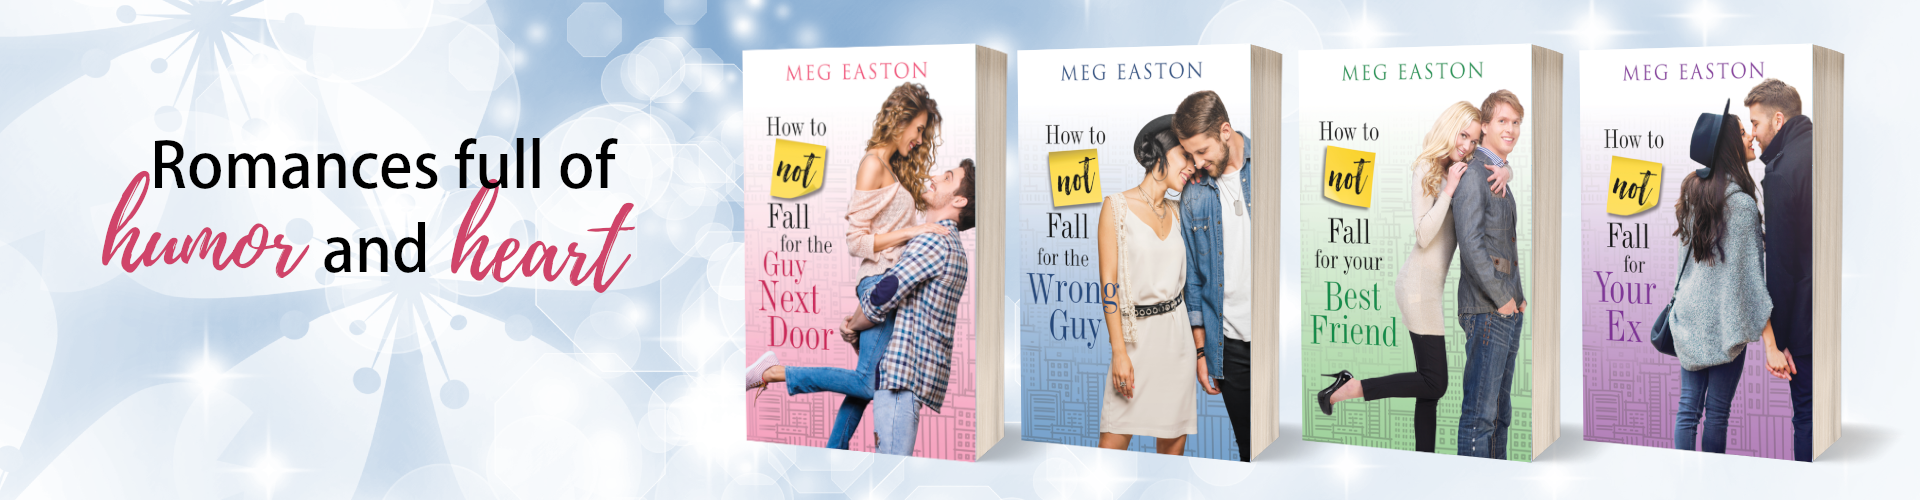 All 4 book covers for the How to Not Fall series